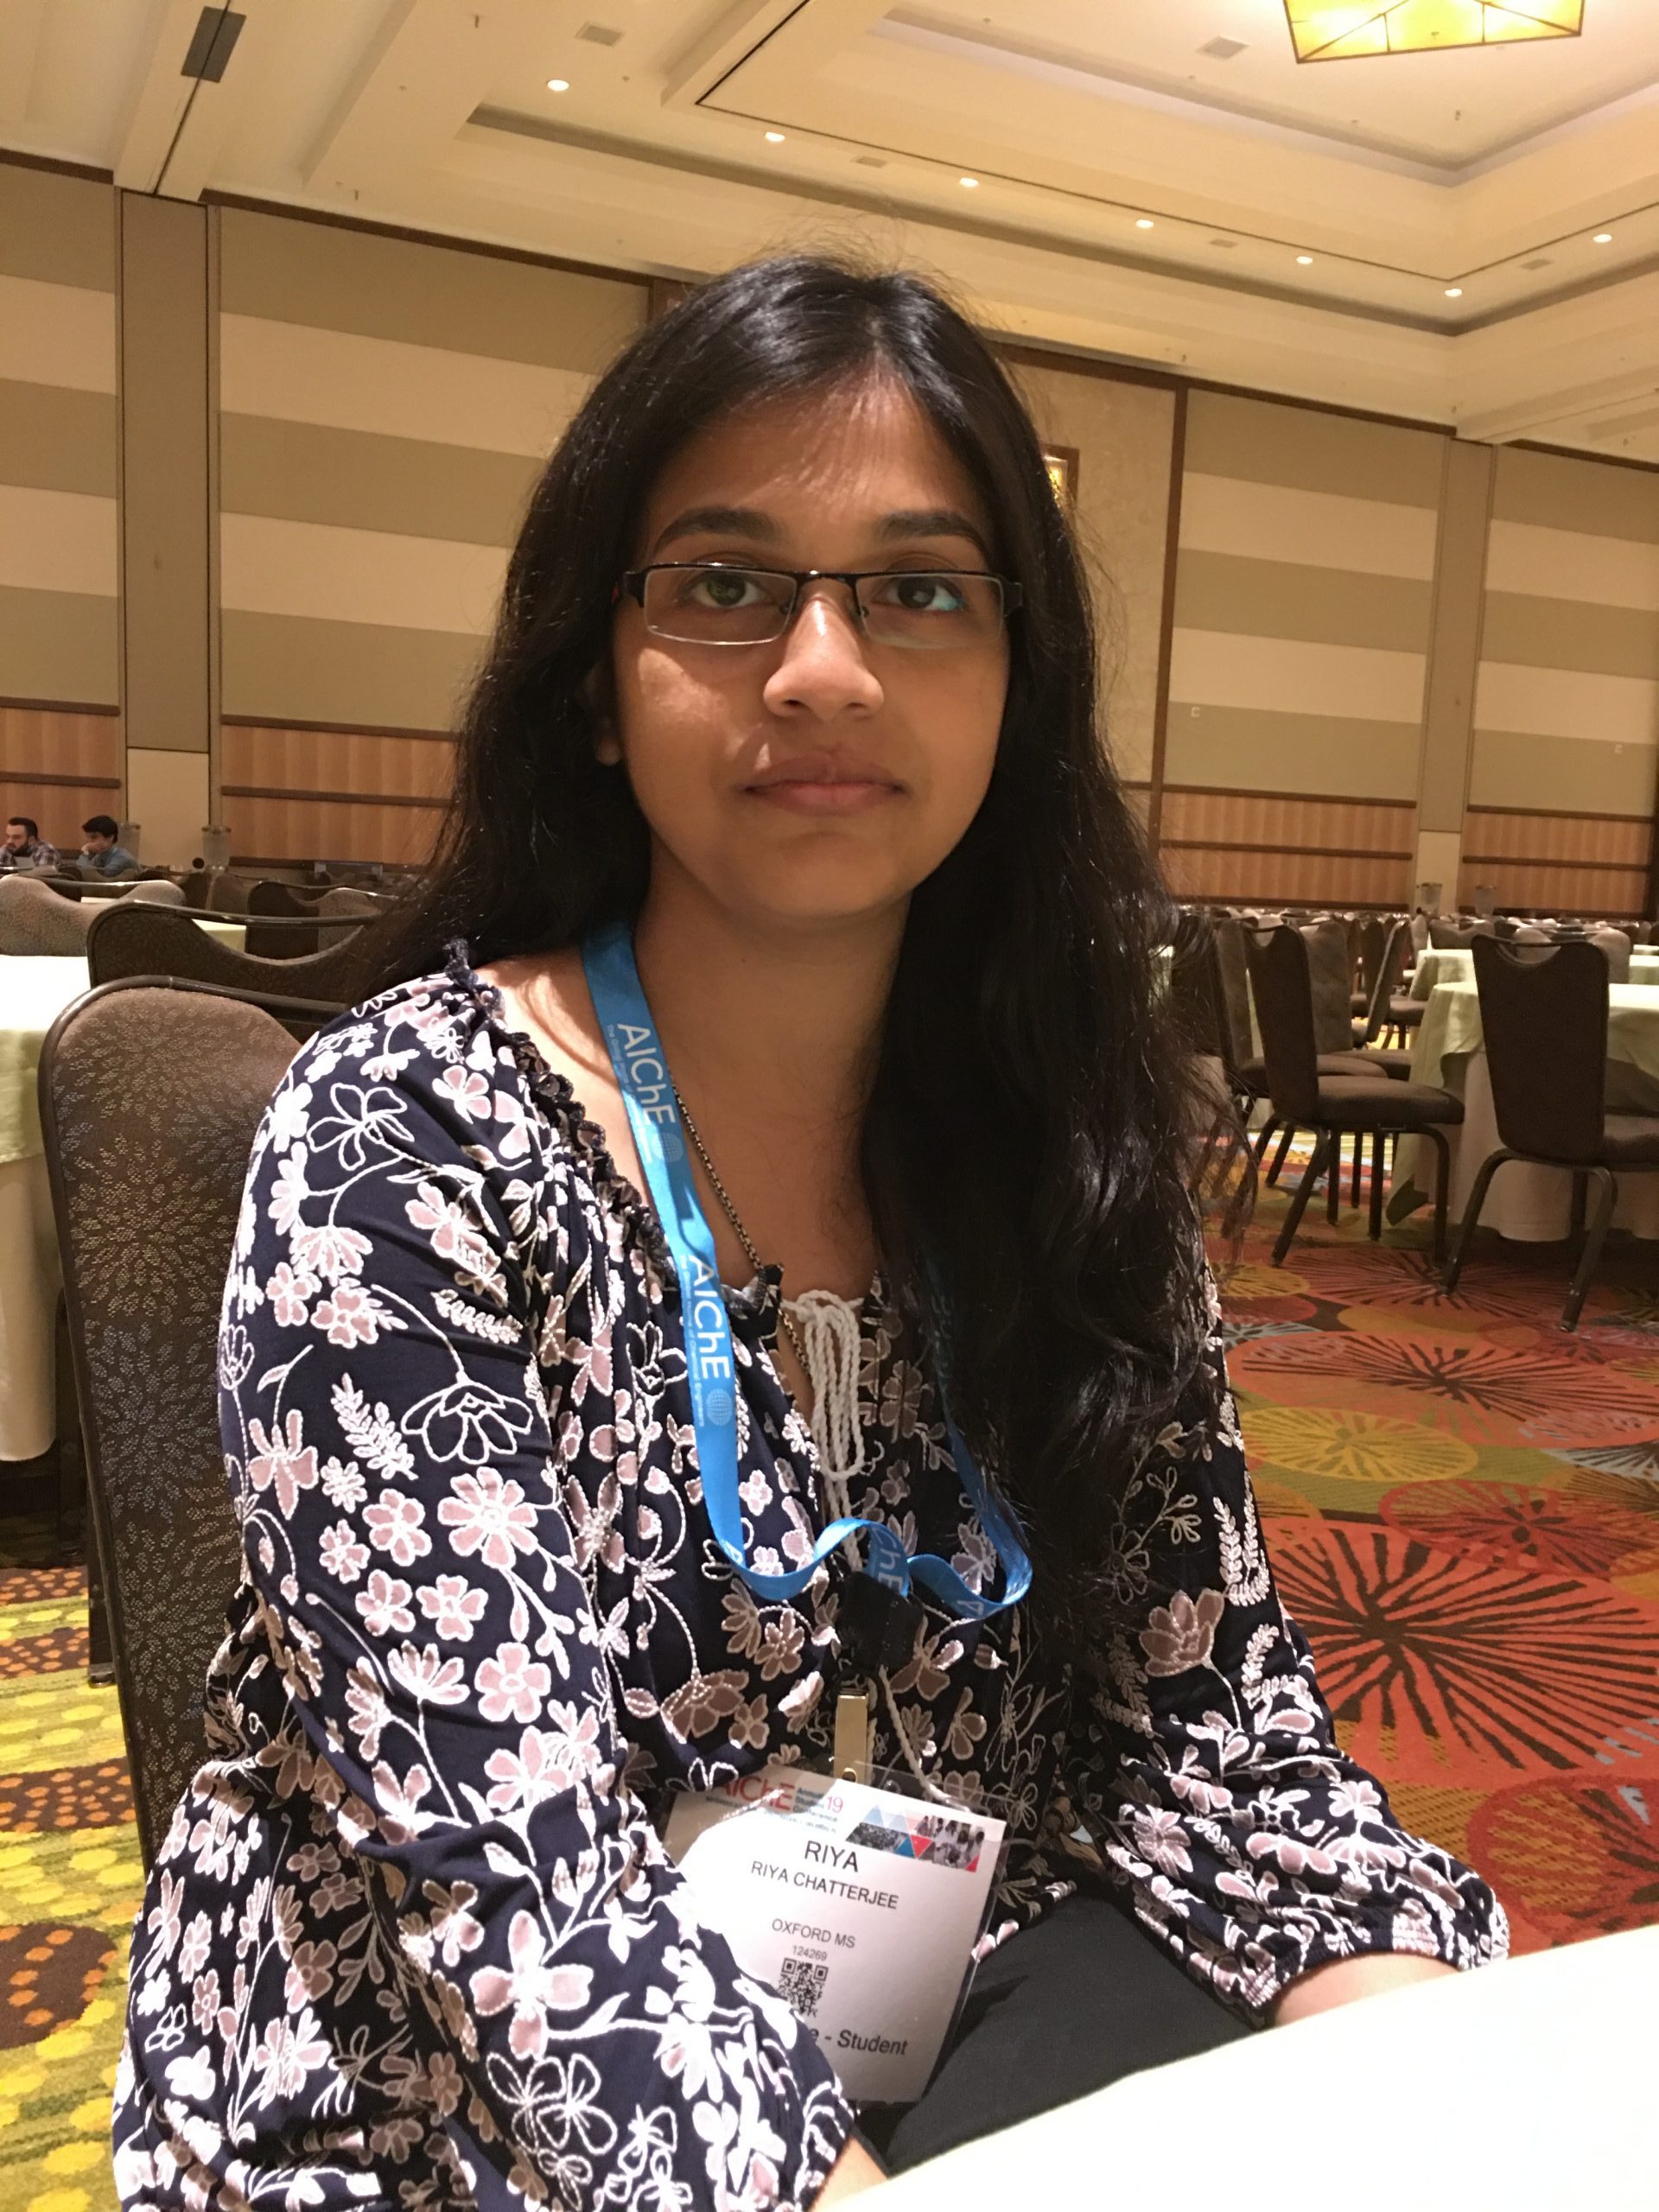 Name: Riya Chatterjee Degree: Ph.D. Academic Program: Chemical Engineering Dissertation Title: INCORPORATION OF ACOUSTIC AND CHEMICAL MODIFICATIONS TO BIOCHAR FOR POLLUTION ABATEMENT